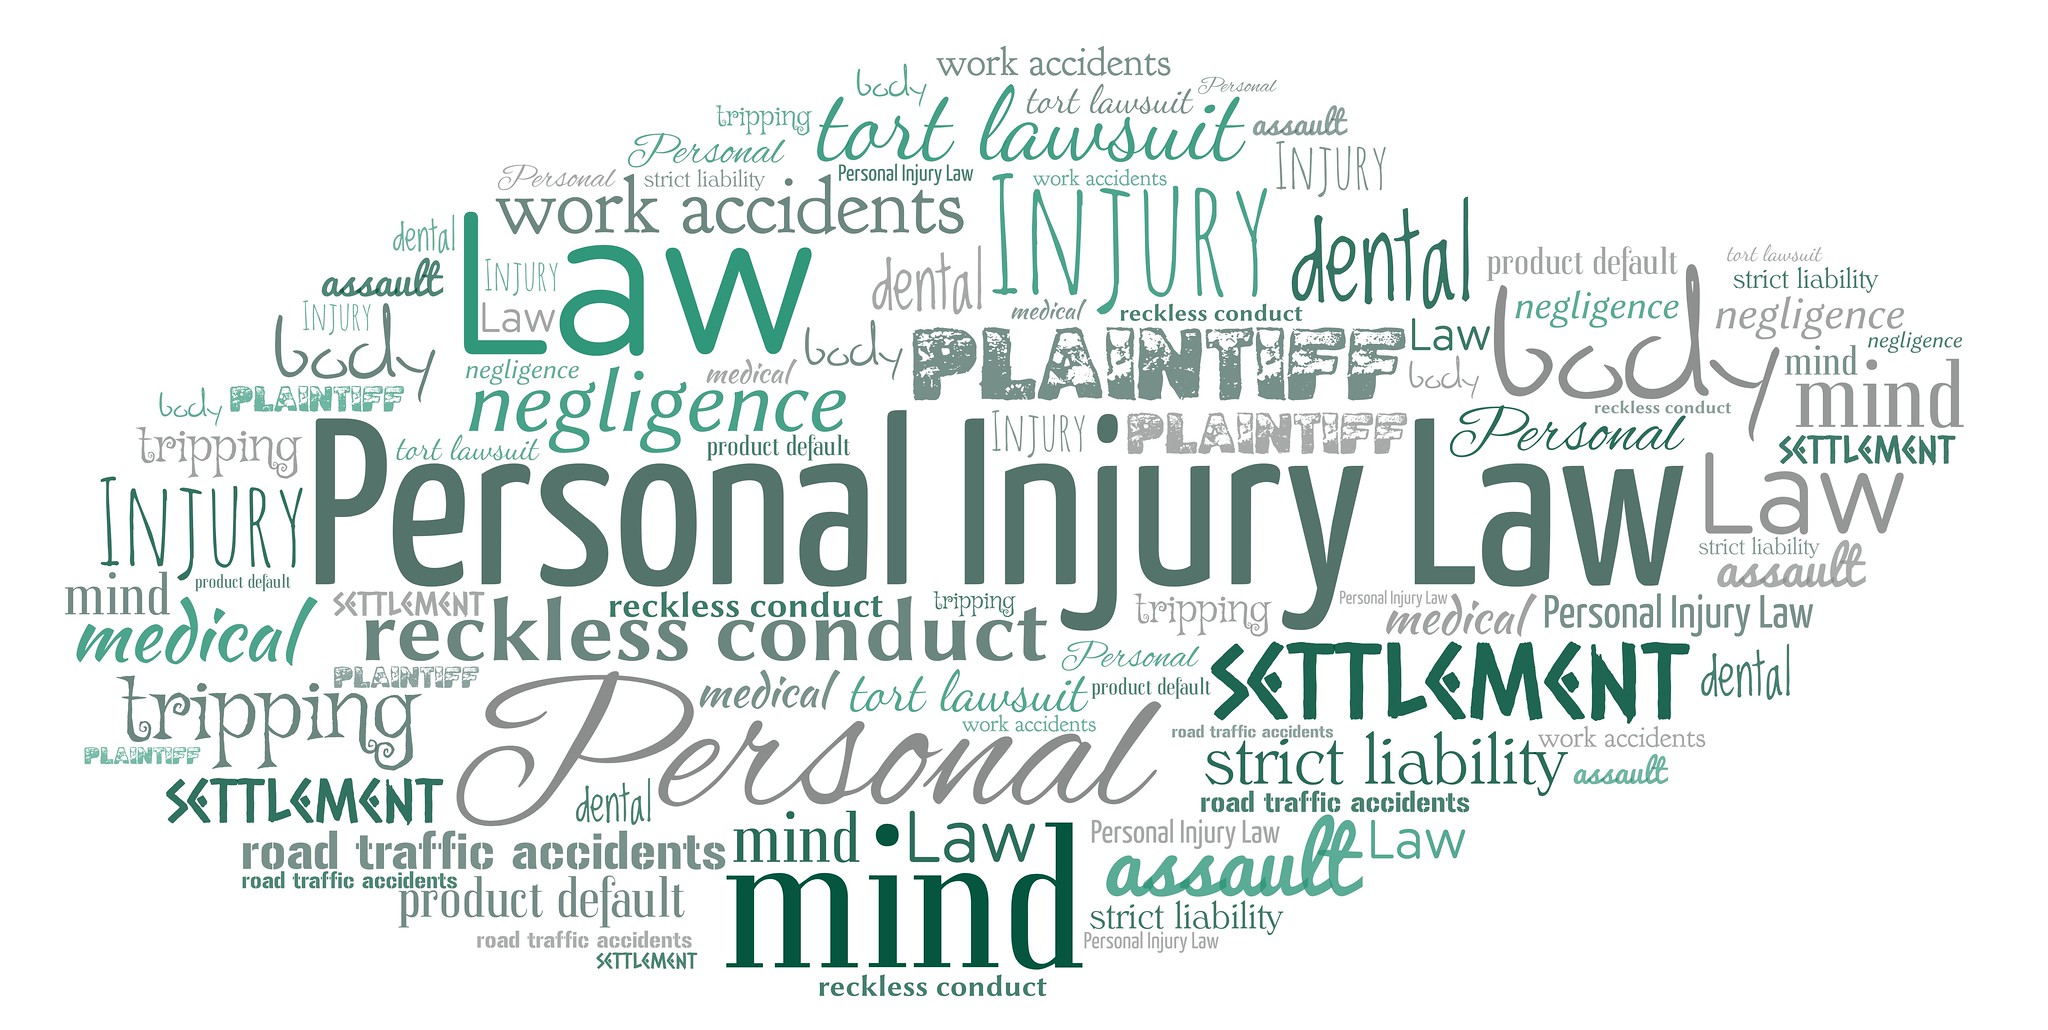 Hawaii Injury and Accidet Attorney Cluster